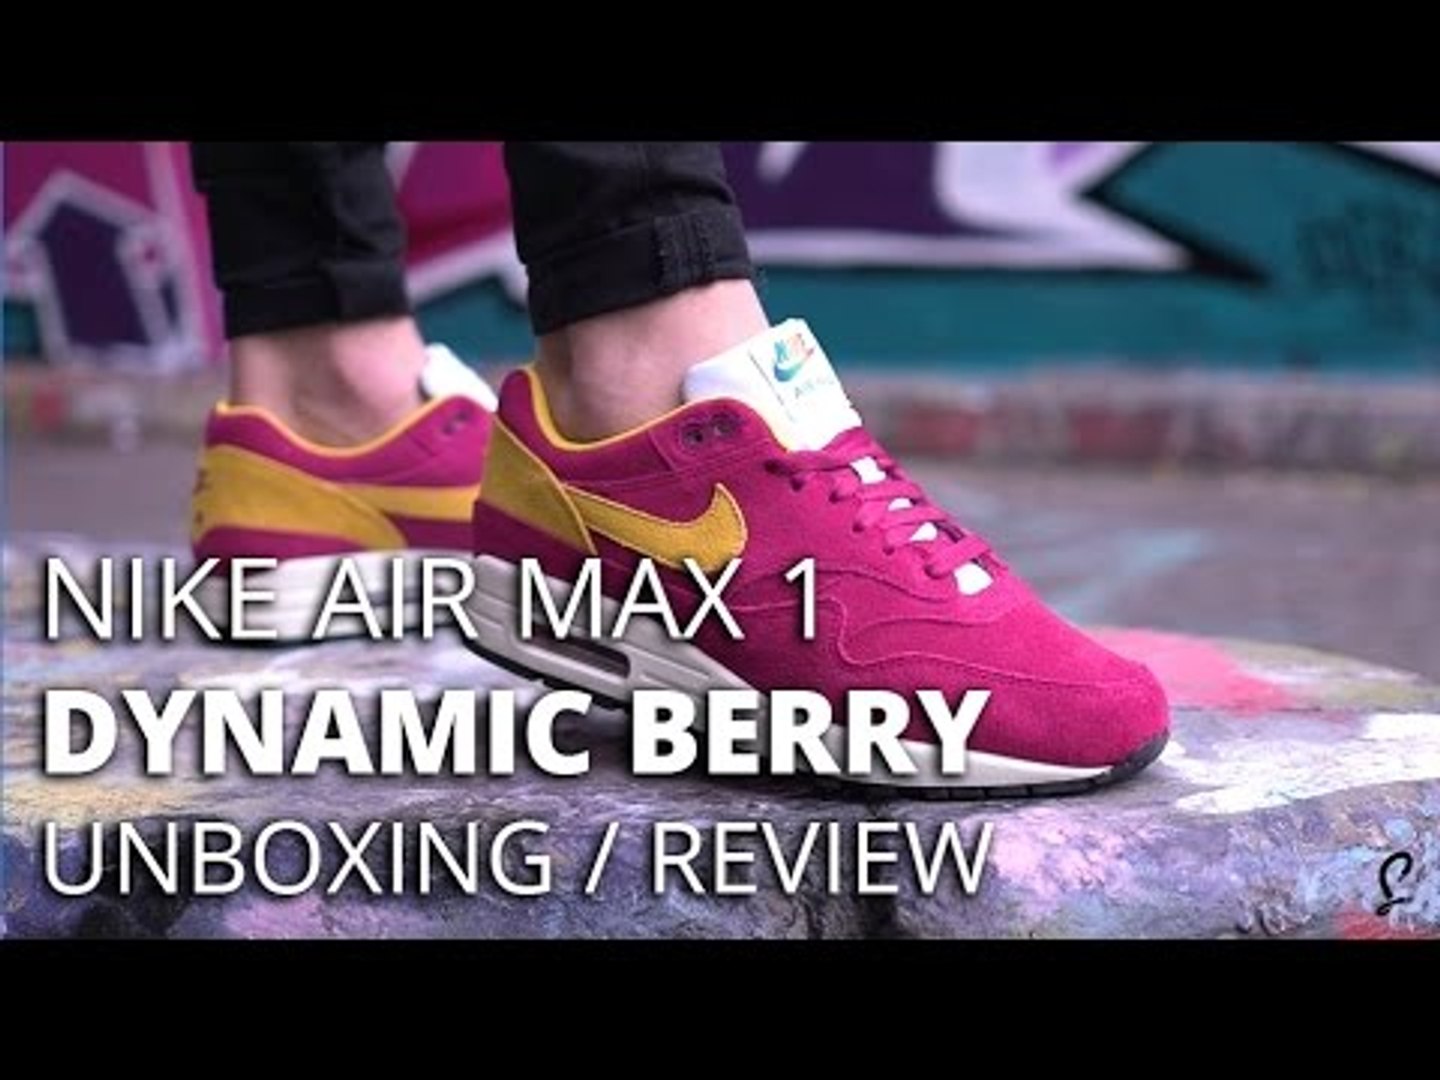 Nike Air Max 1 Dynamic Berry Review / Unboxing - video Dailymotion